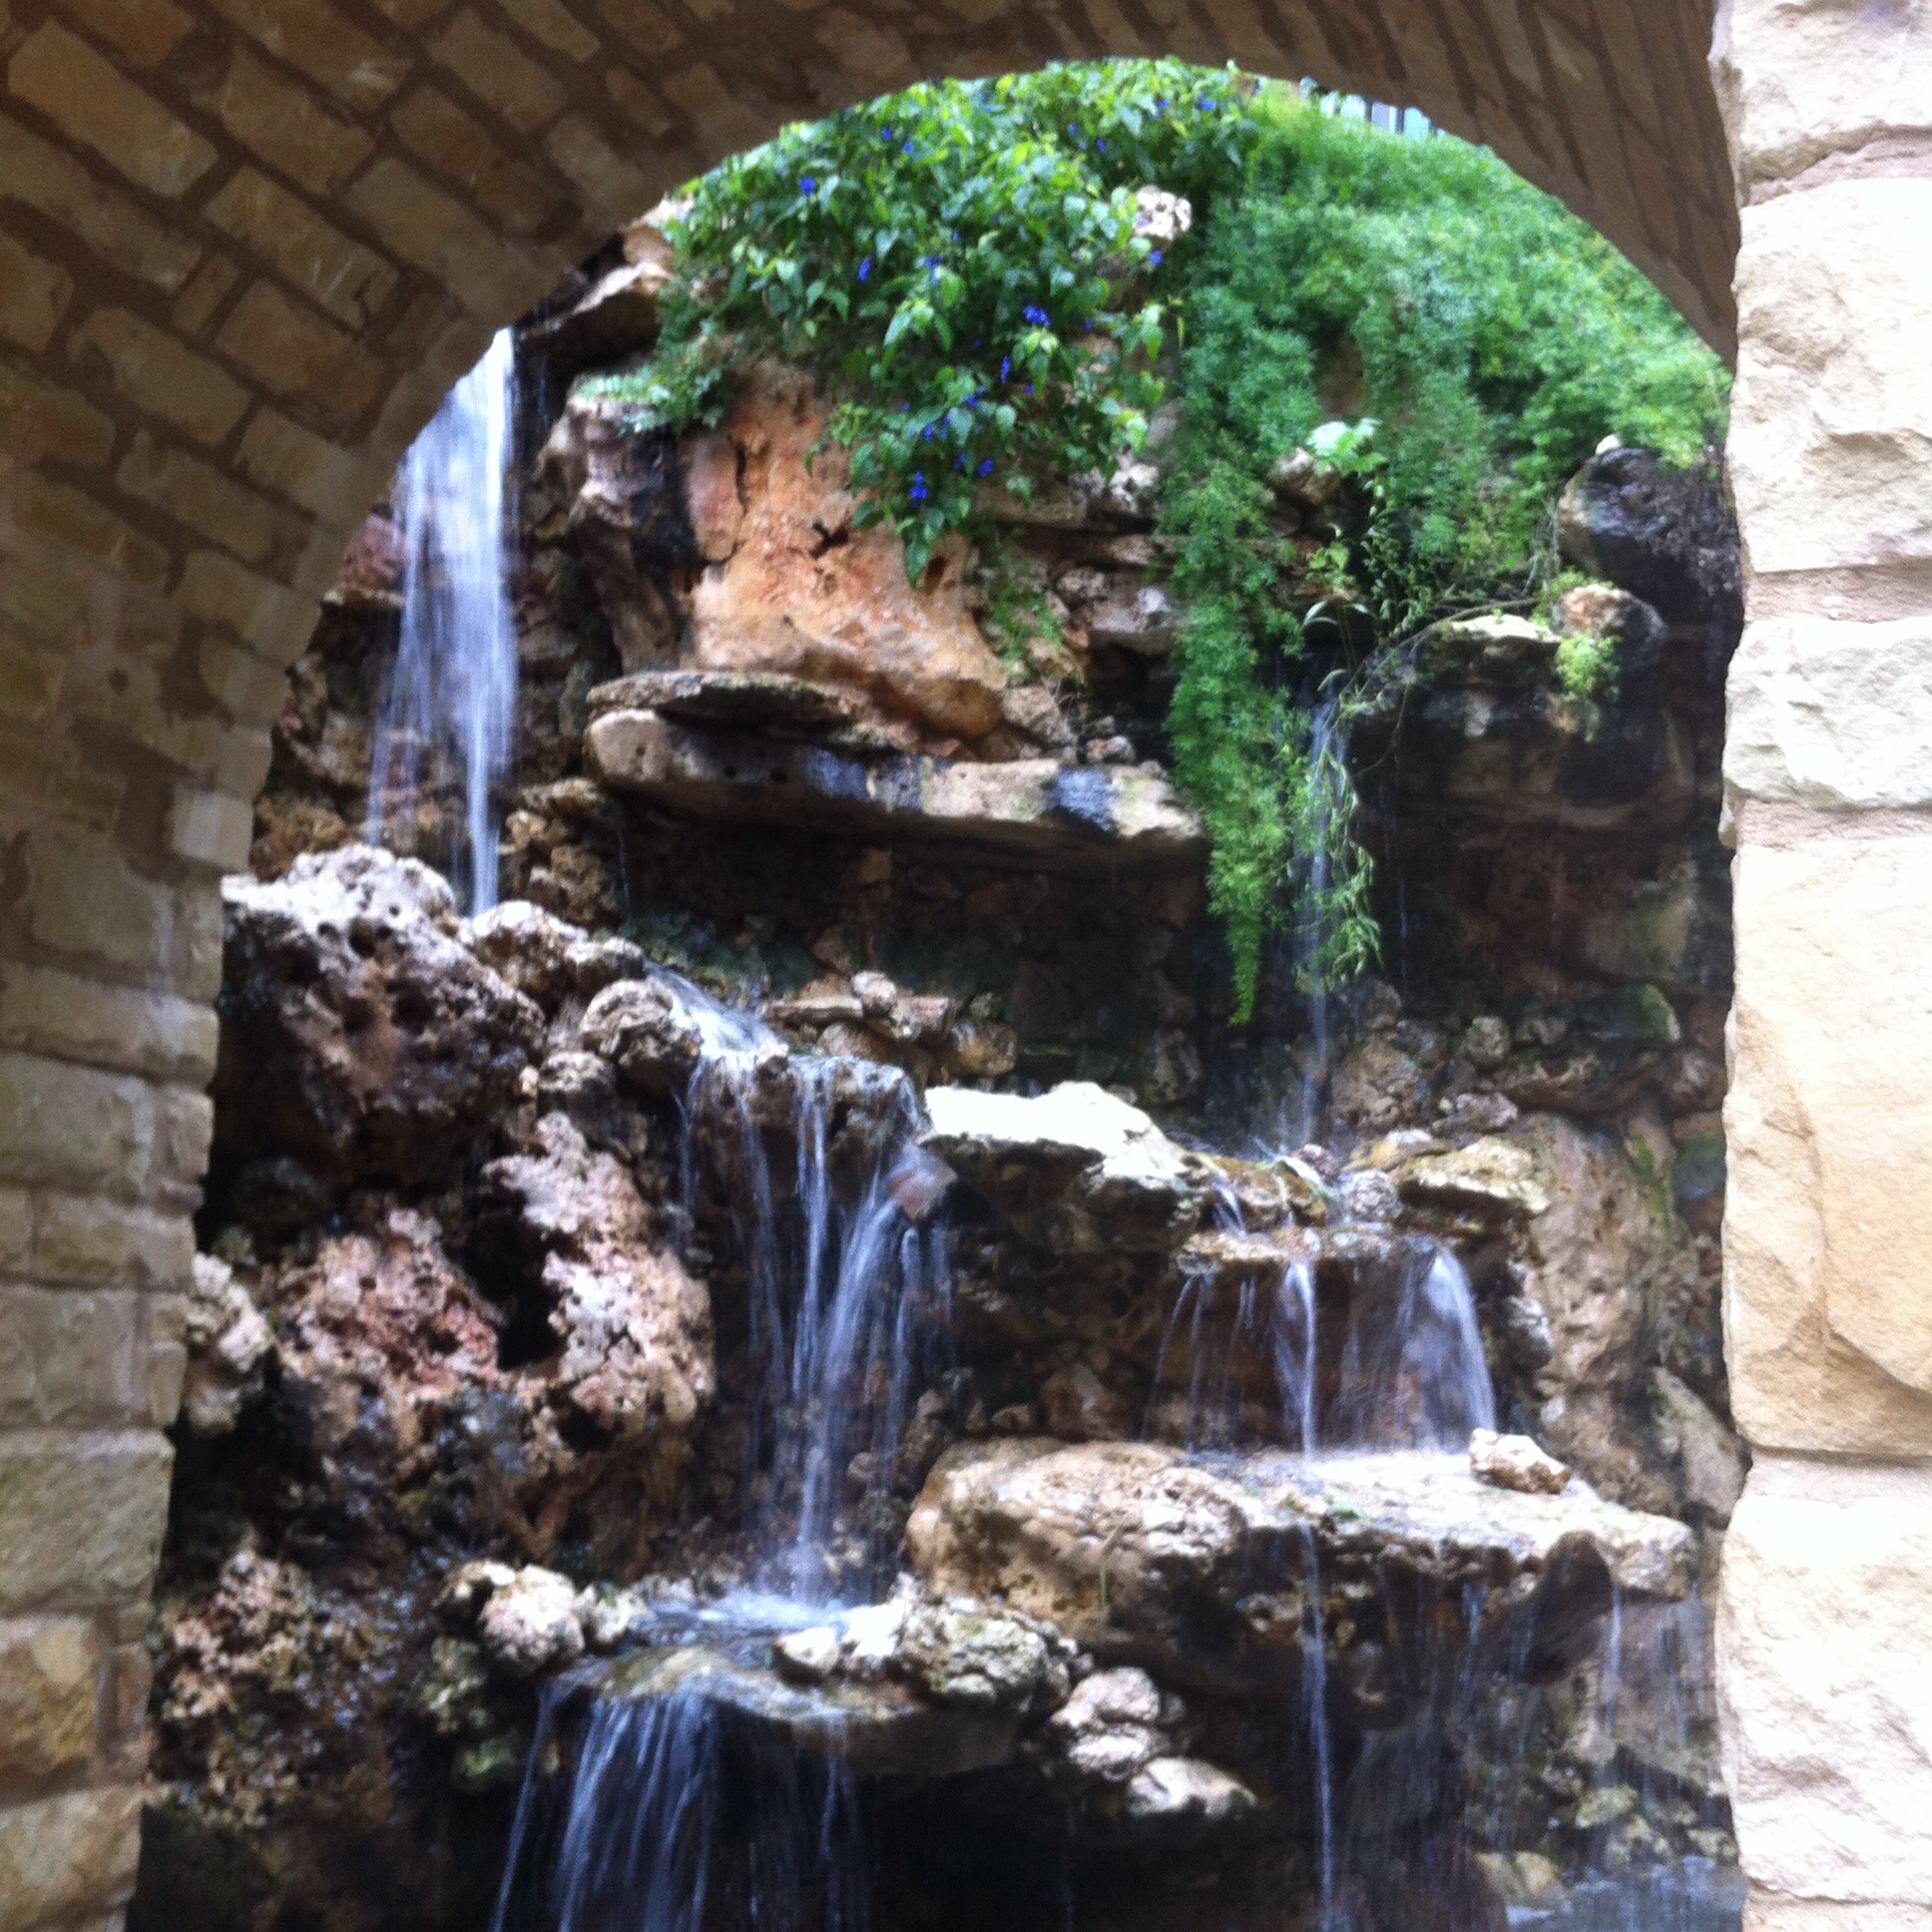 Archway with waterfall in the riverwalk in San Antonio while there for The Daring Way (TM) course